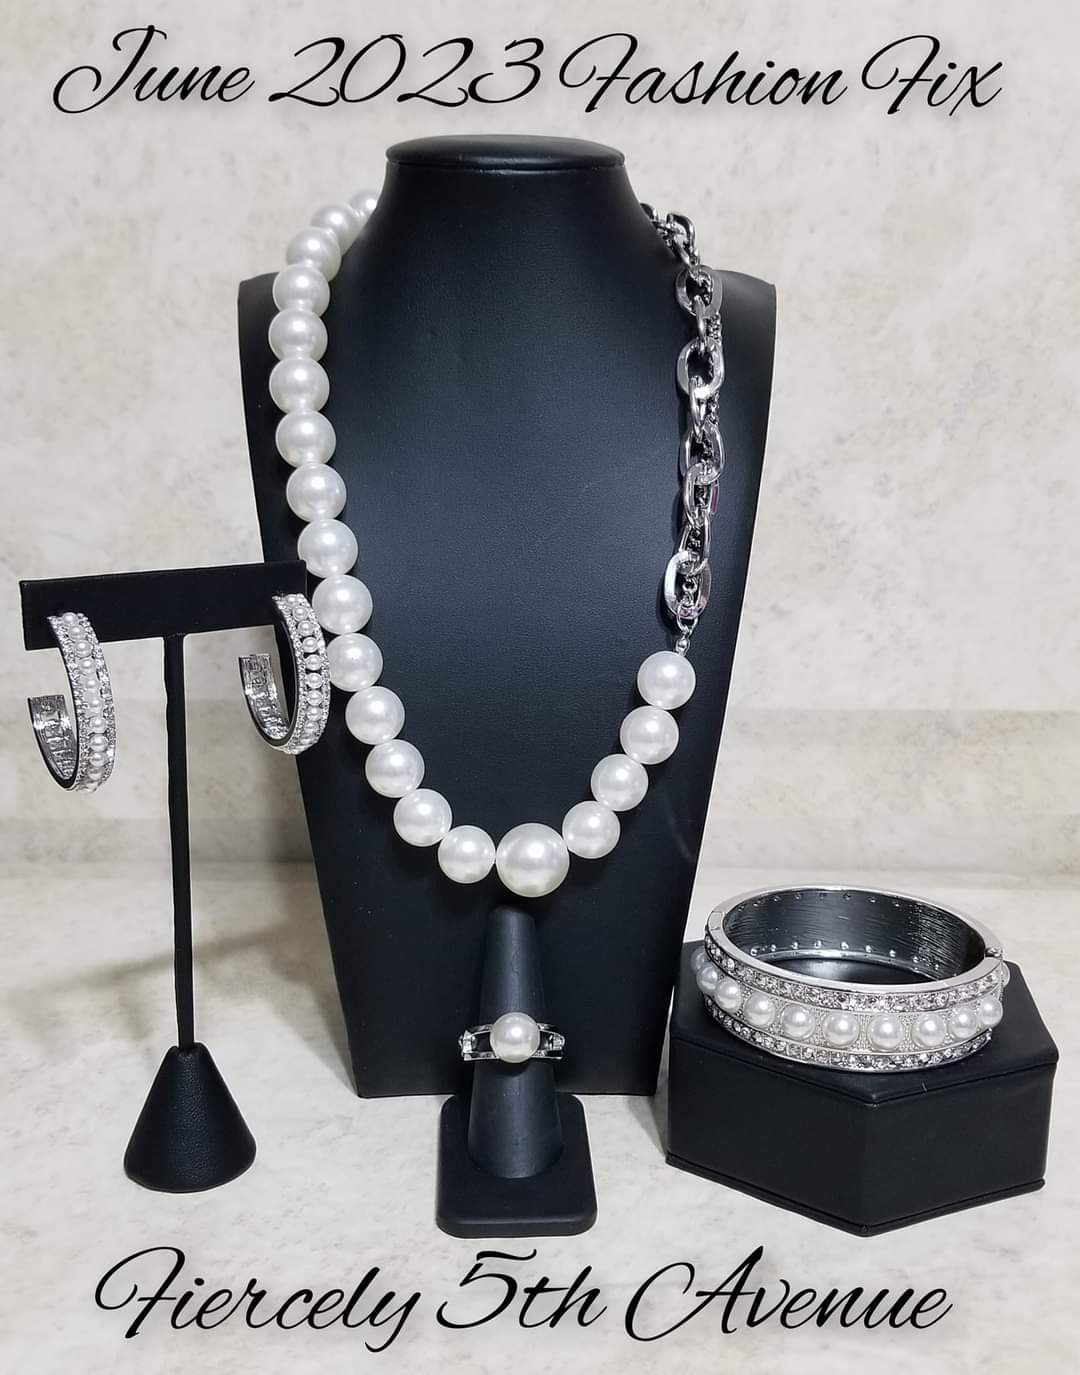 Fiercely Fifth Avenue - 4 Piece White Pearl Set - Paparazzi Accessories